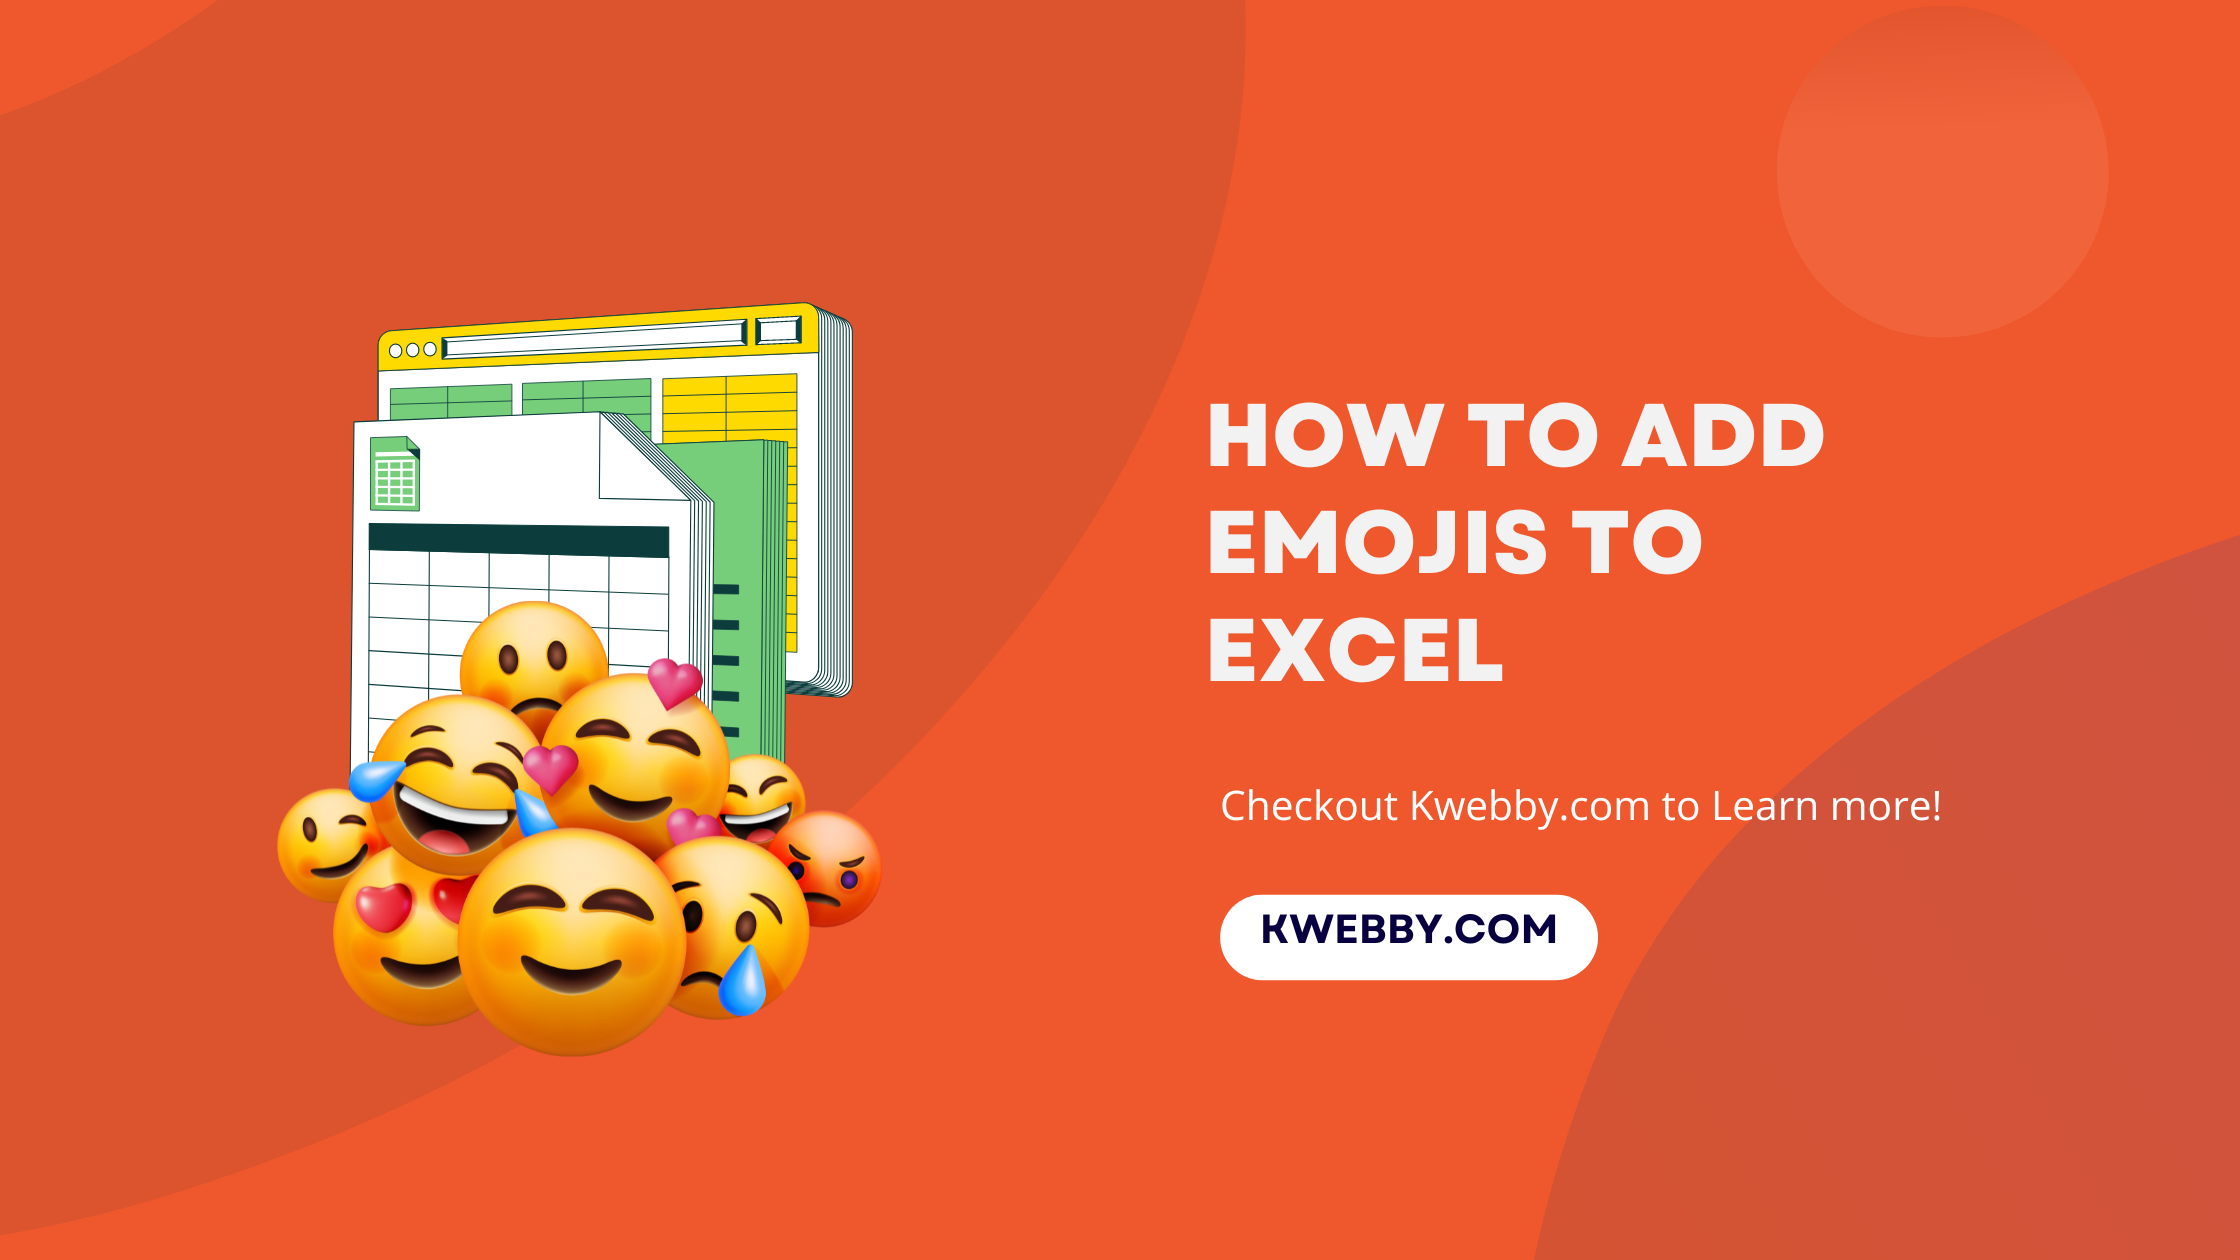 How to add emojis to Excel